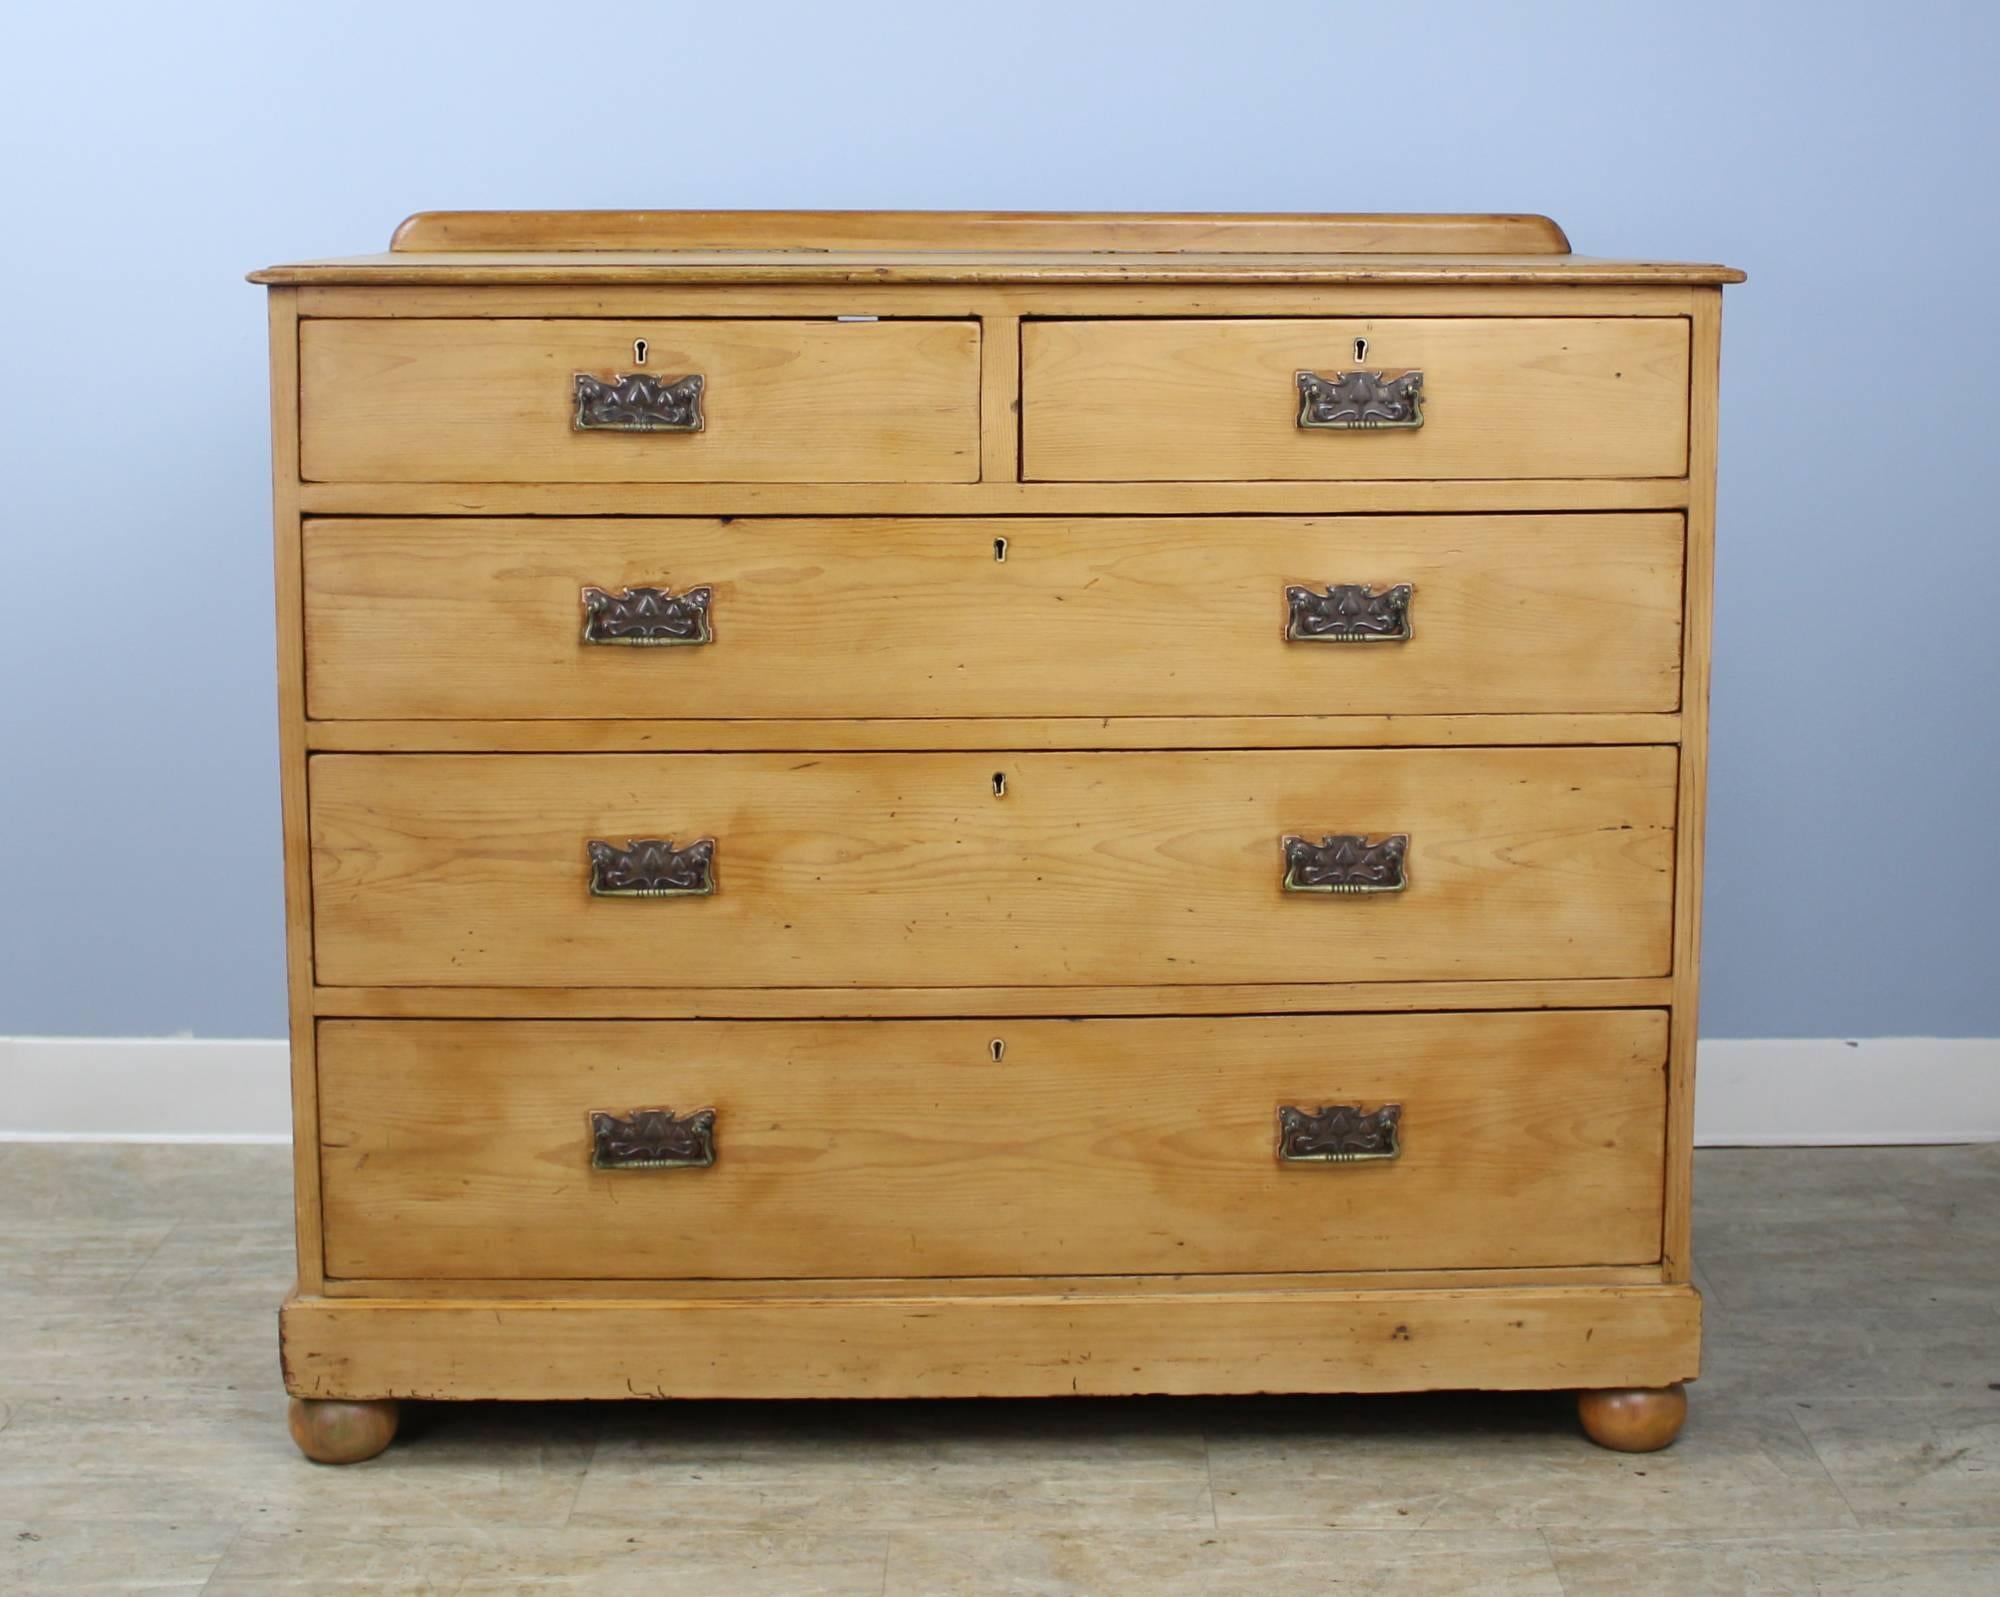 A handsome simple chest of drawers in English Pine. Classic two-over-three configuration with decorative Arts & Crafts brass hardware. The drawers slide easily and are very clean inside. Small gallery on the top adds a decorative note.